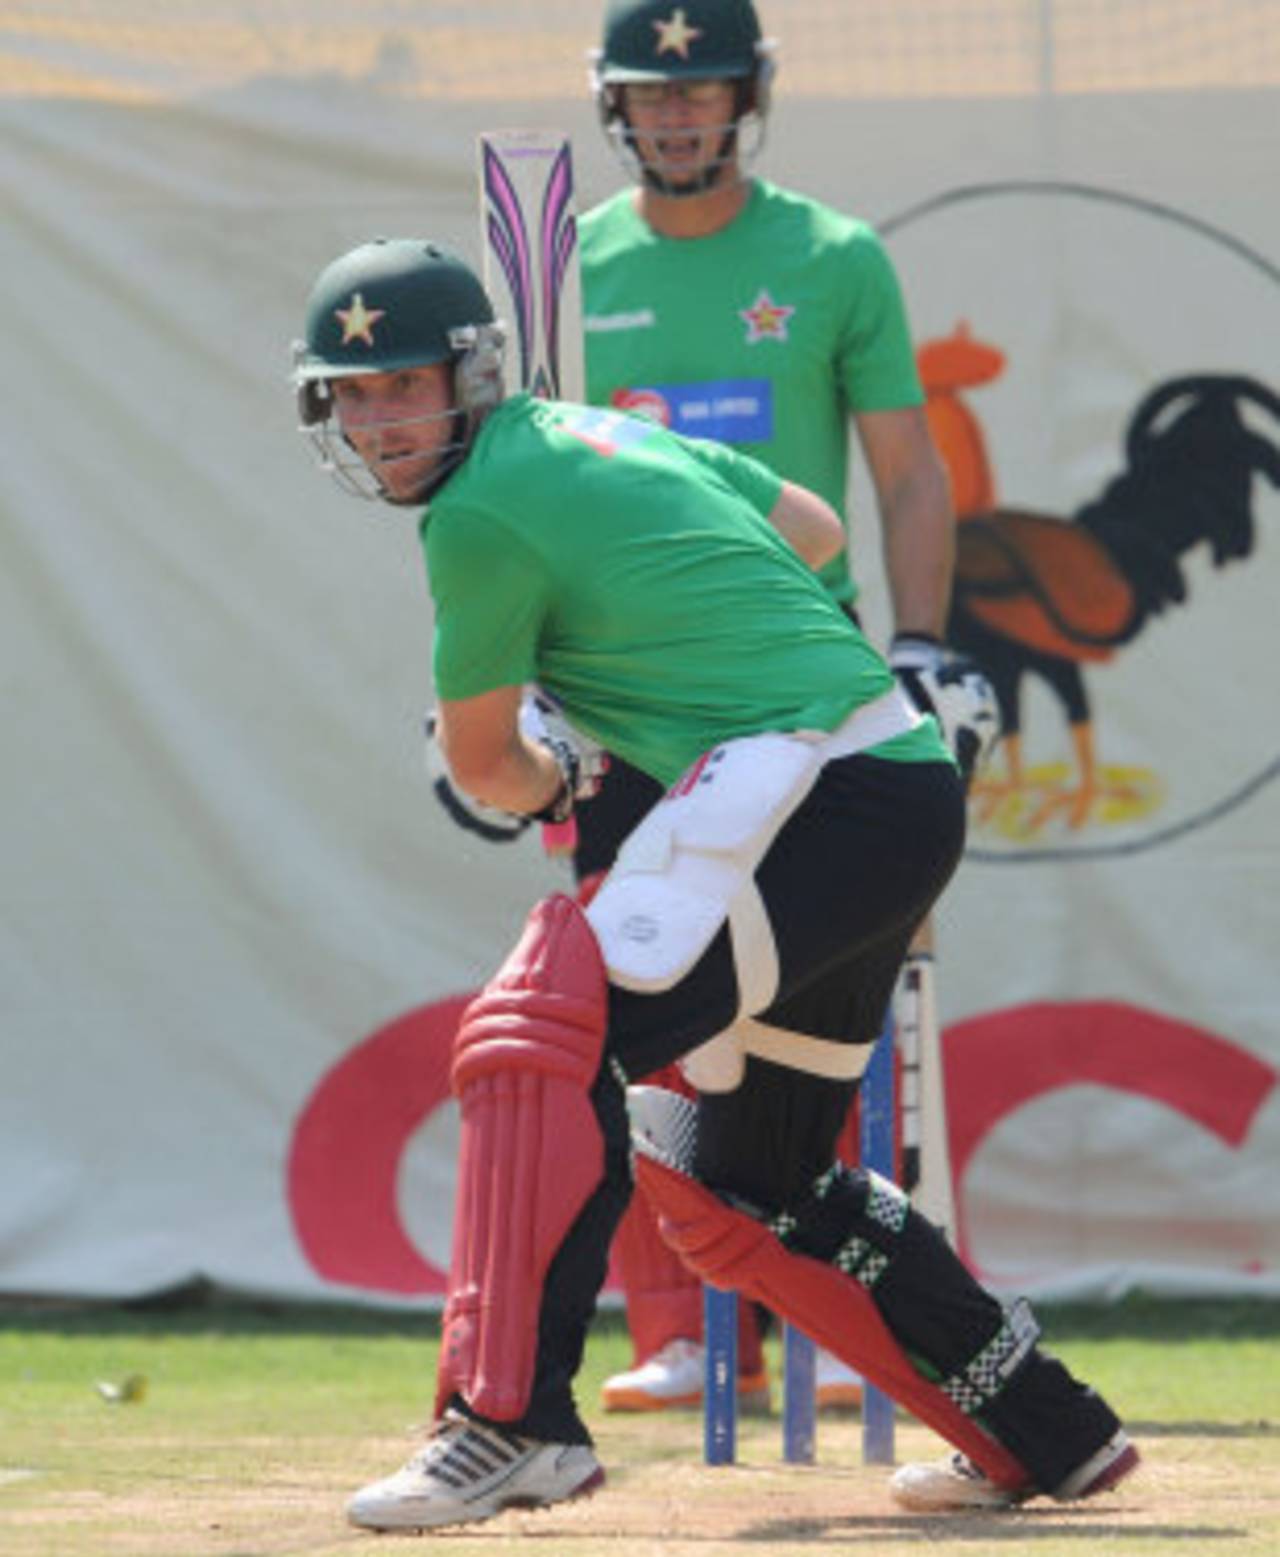 Brendan Taylor, Zimbabwe's new captain, practises in the nets in Harare, watched by Charles Coventry, June 24, 2011